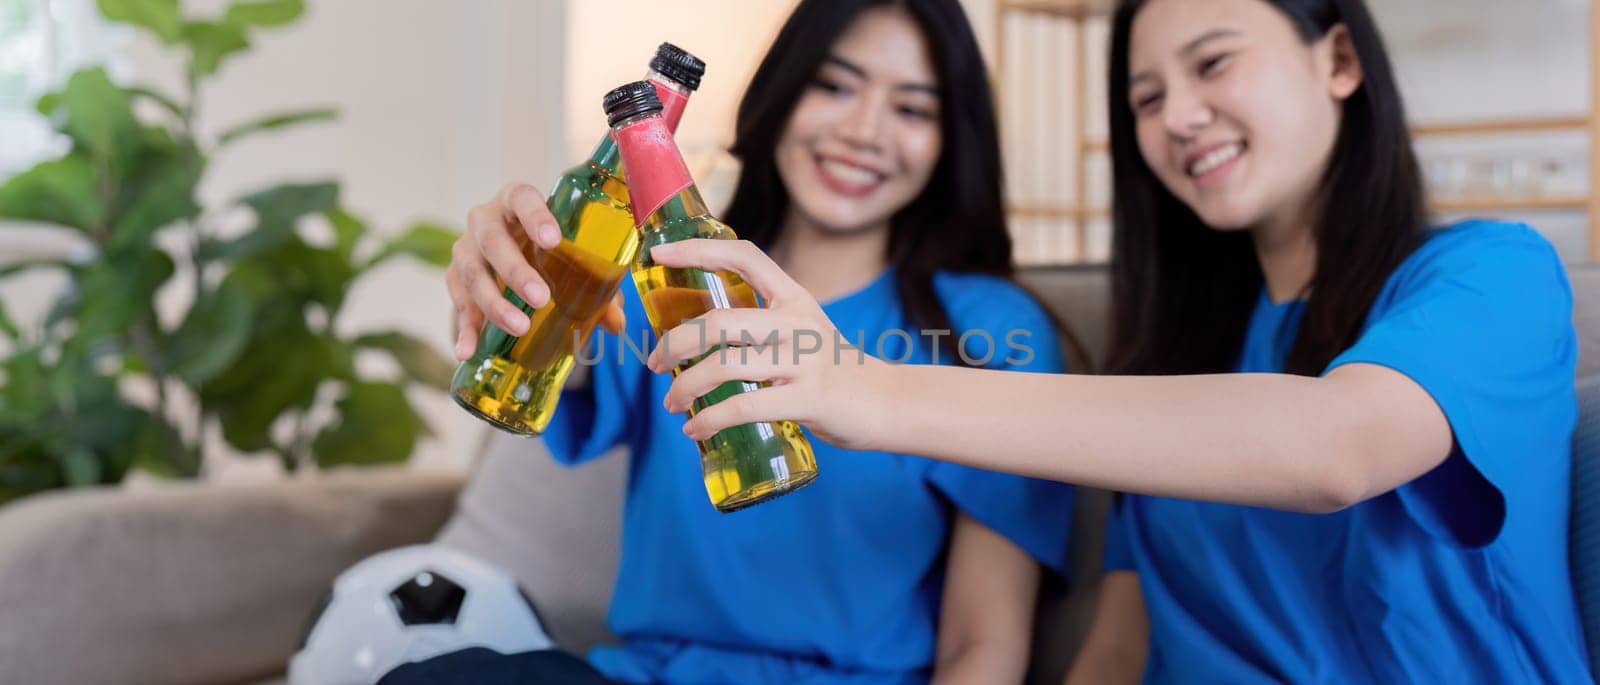 Lesbian couple cheering and toasting for Euro football at home with drinks. Concept of LGBTQ pride, sports enthusiasm, and celebration by nateemee